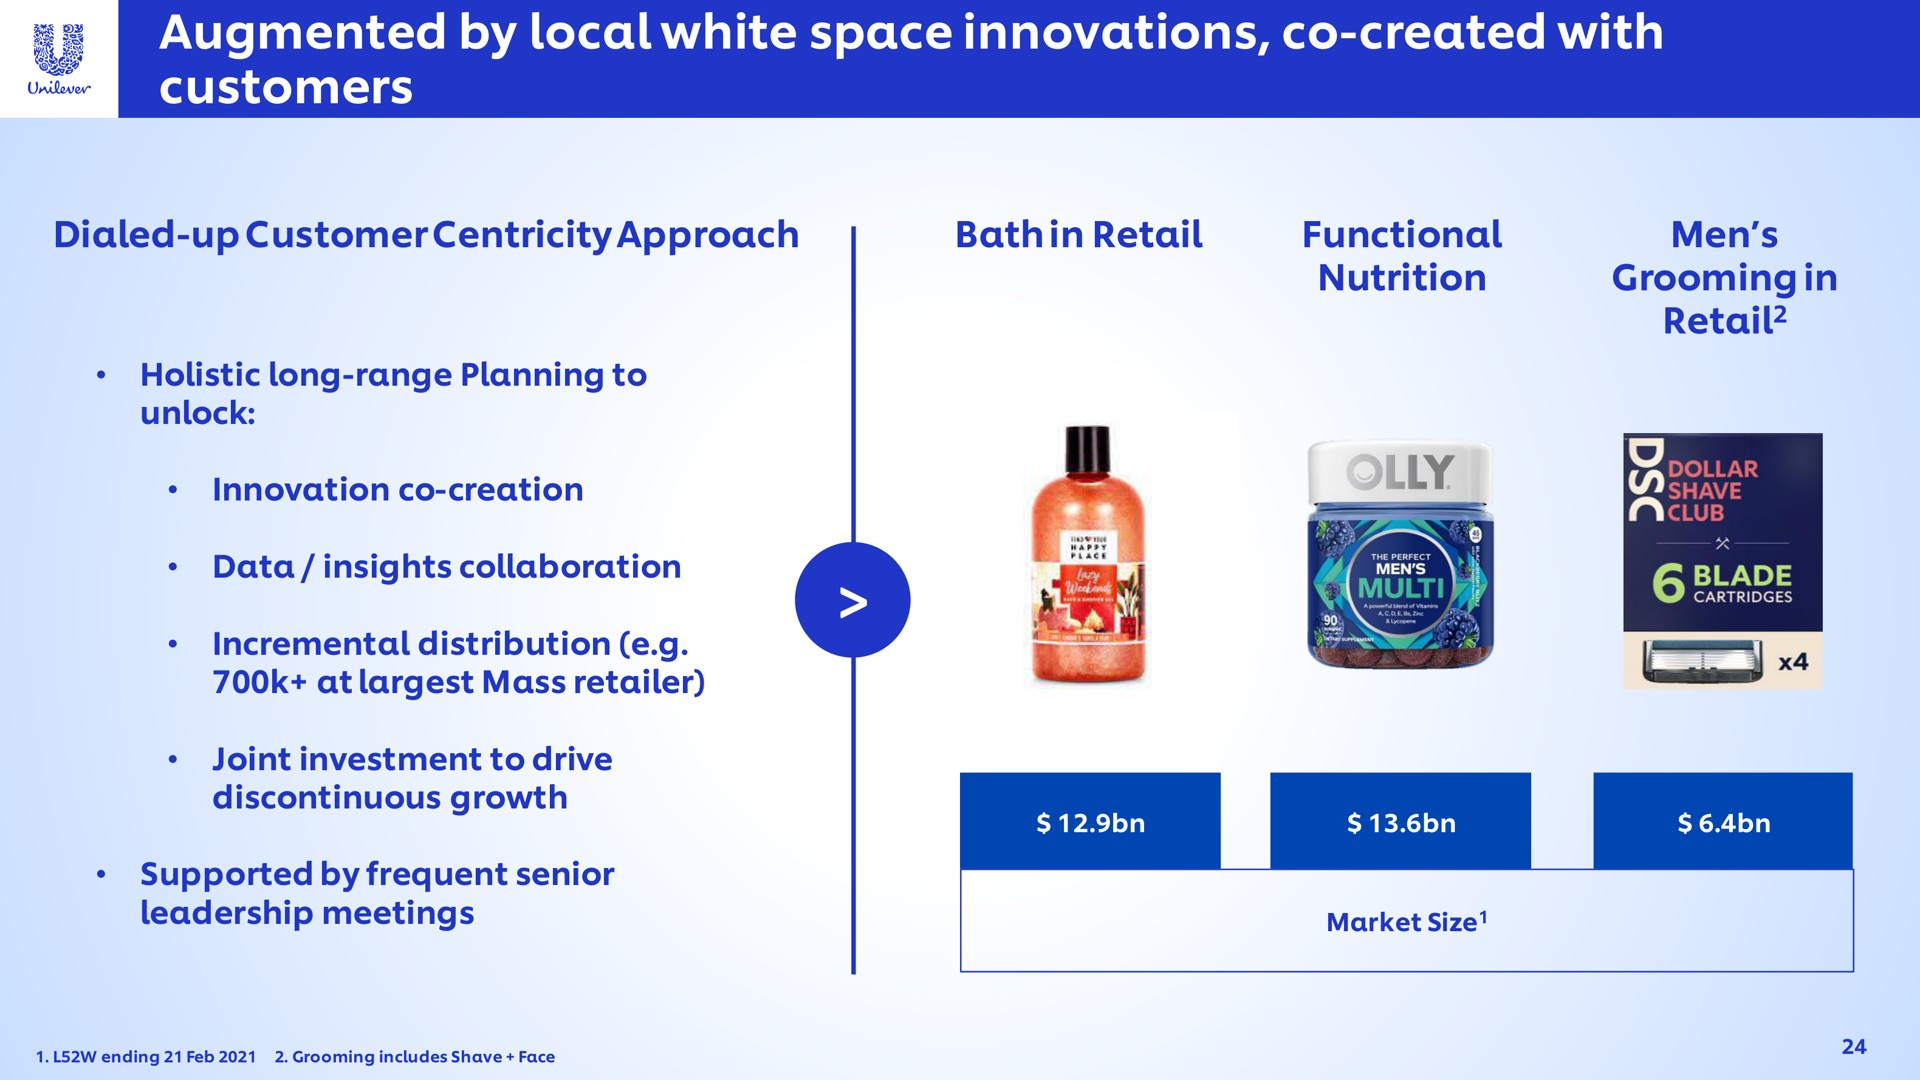 augmented by local white space innovations created with customers | Unilever